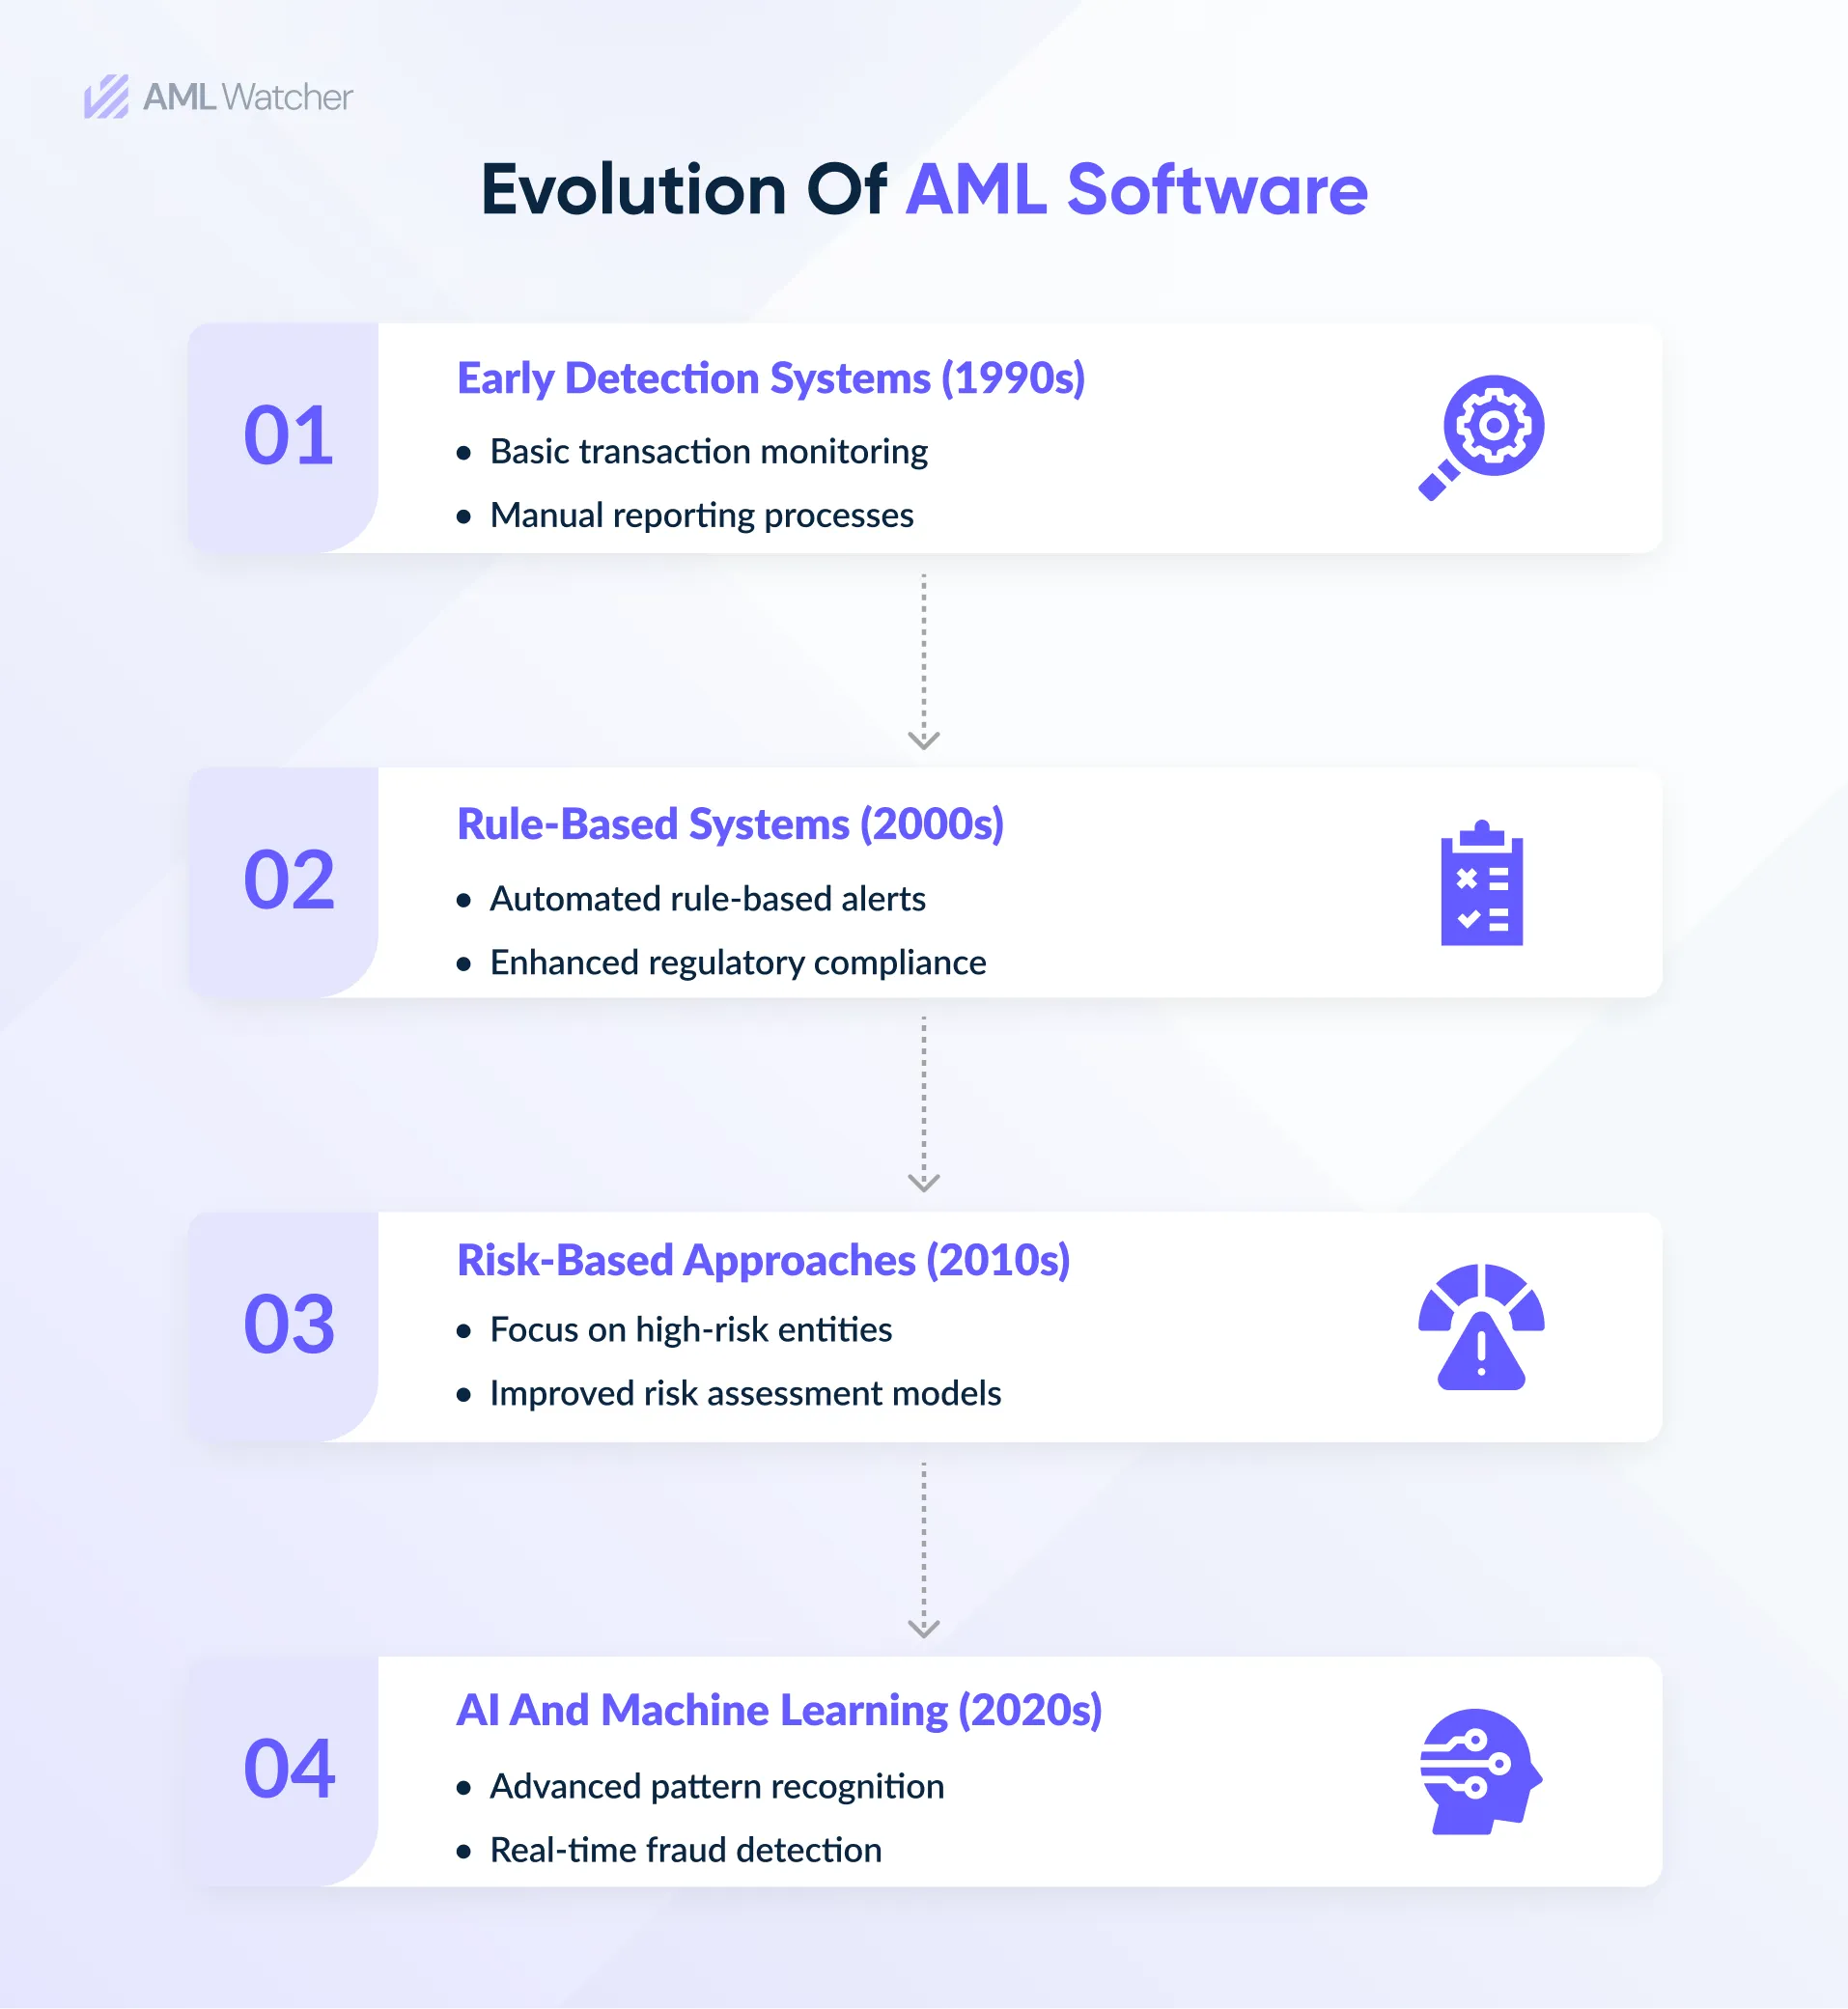 The image shows evolution of AML software